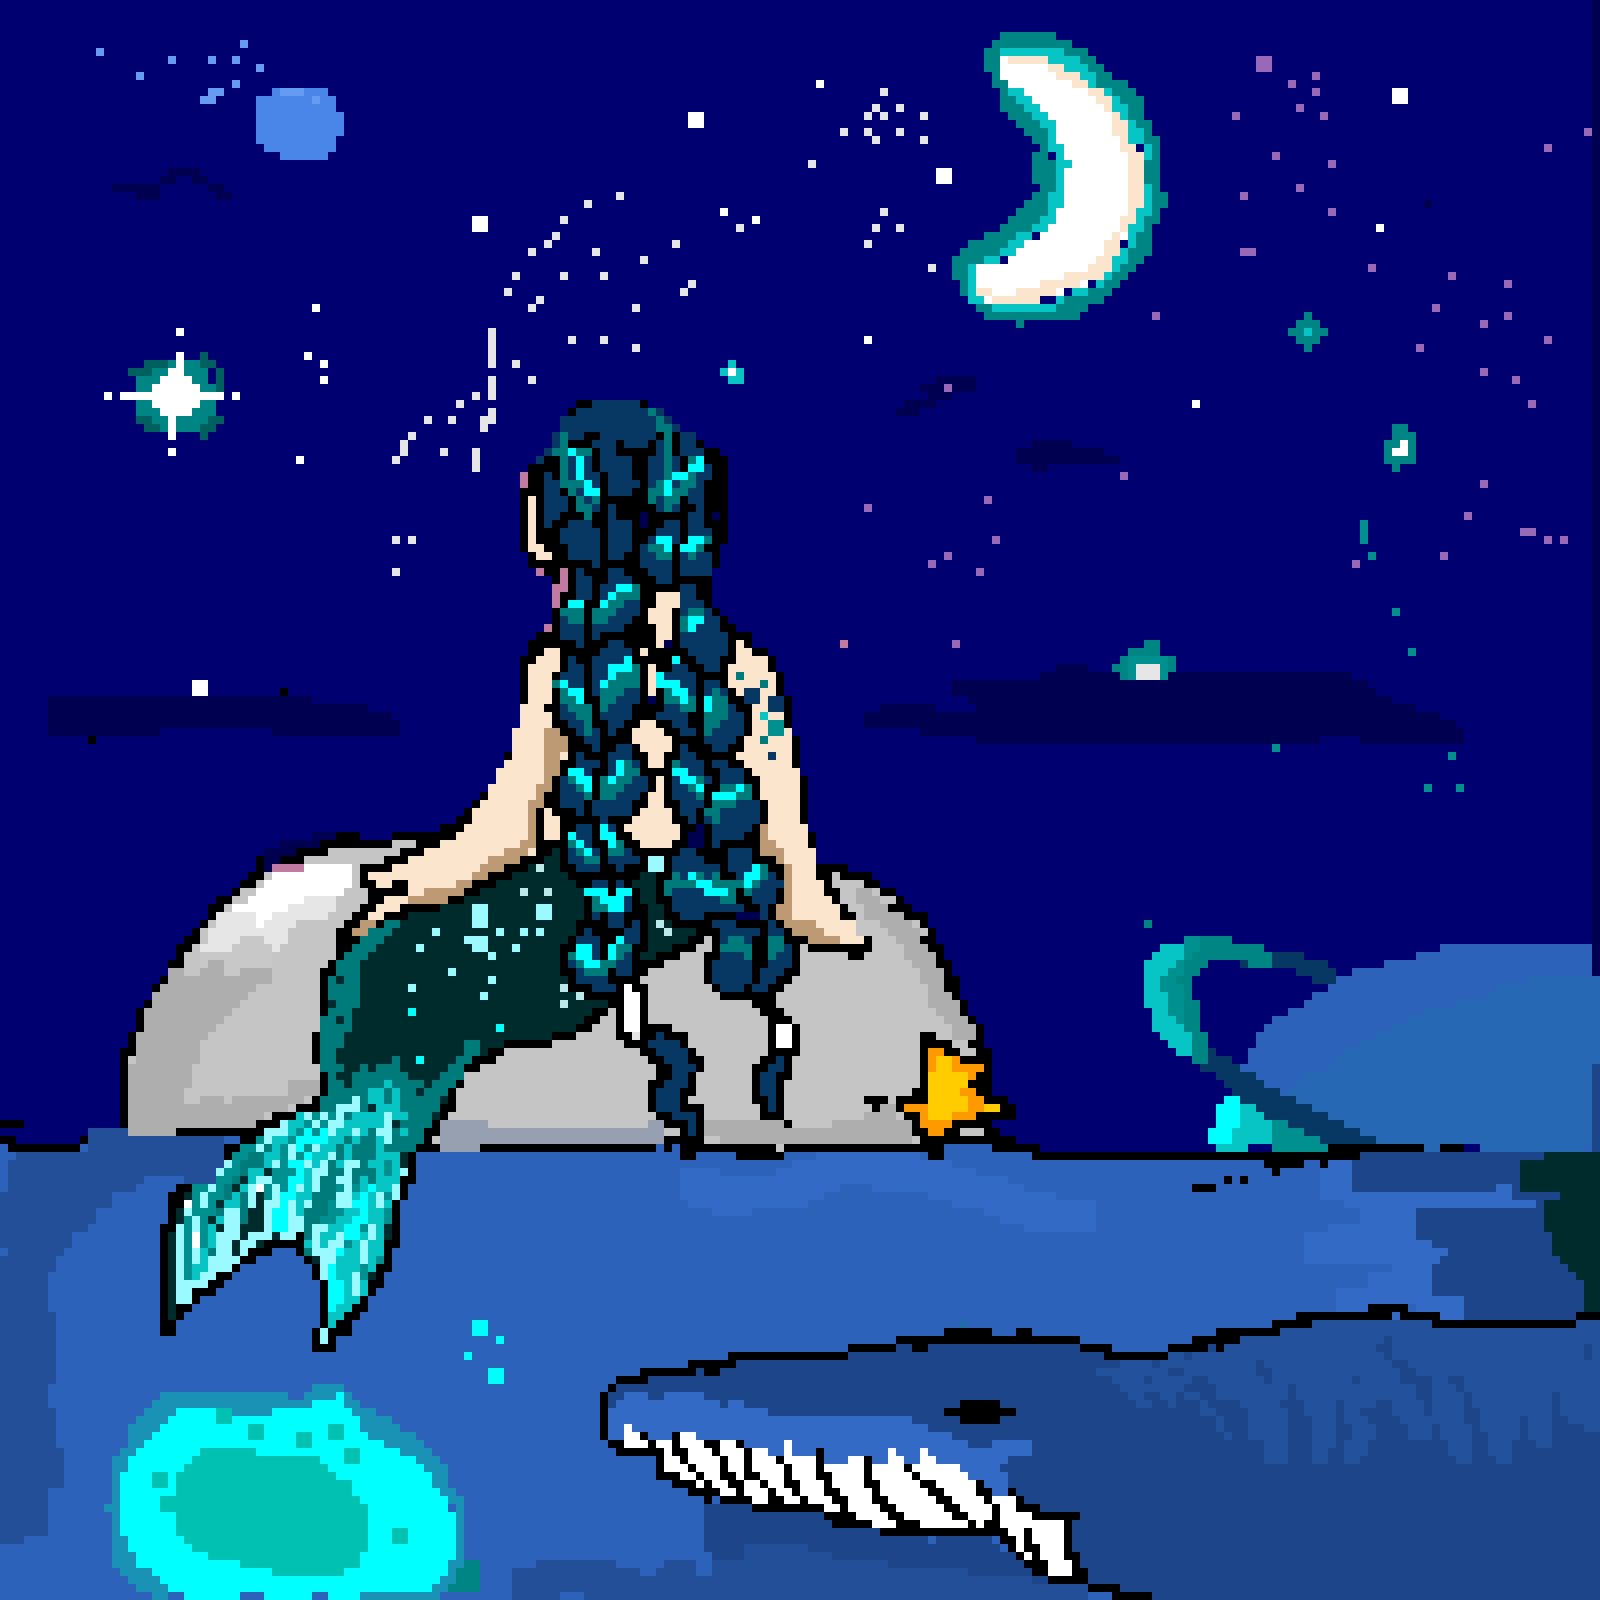 mermaid watching stars in middle of ocean with jellyfish and whale (contest)